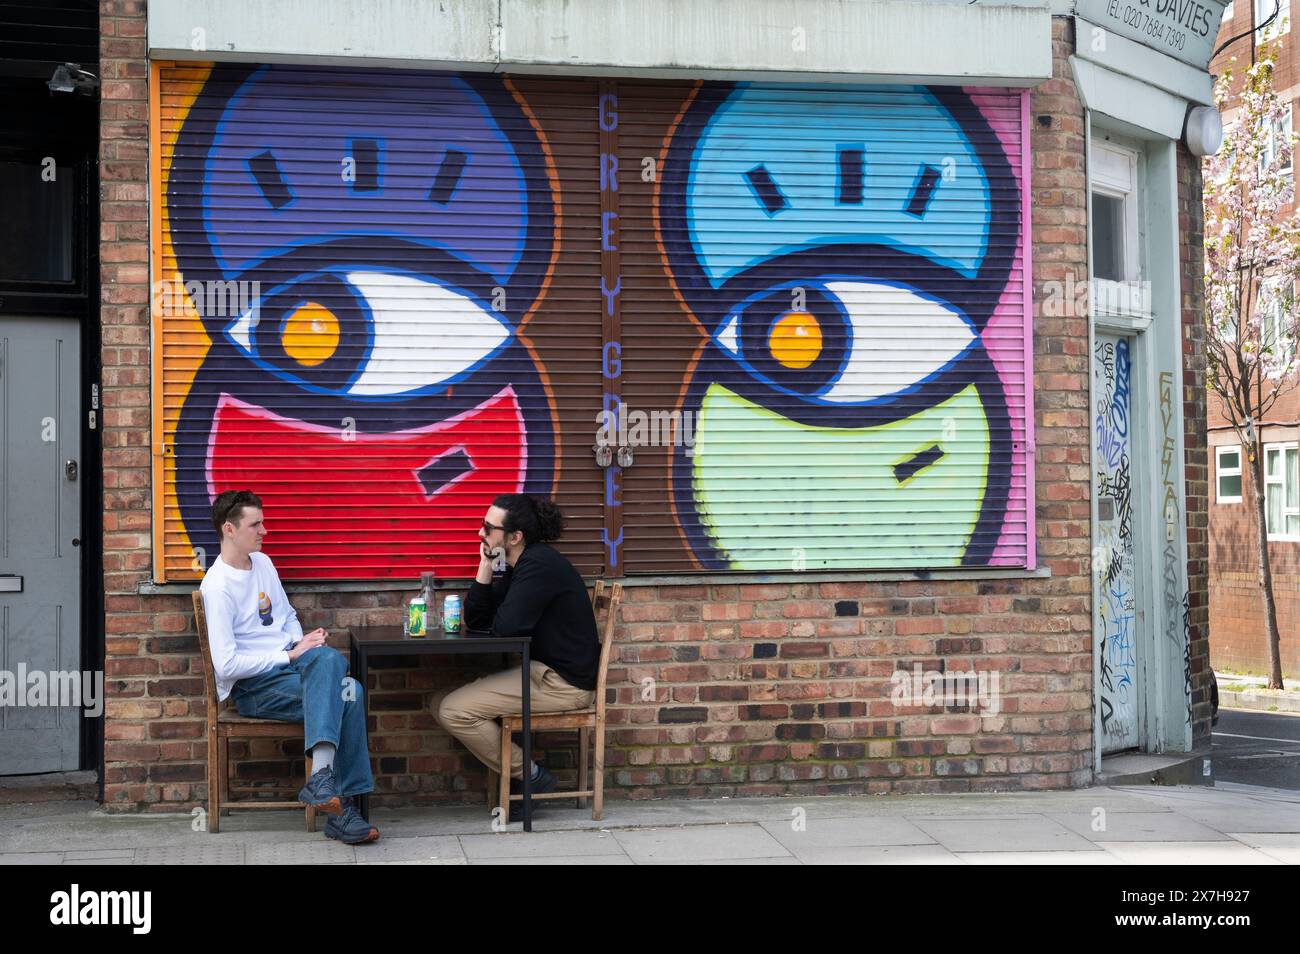 Hackney, Goldsmiths Row. Two young men sit at a table with drinks under a colourful shop blind Stock Photo